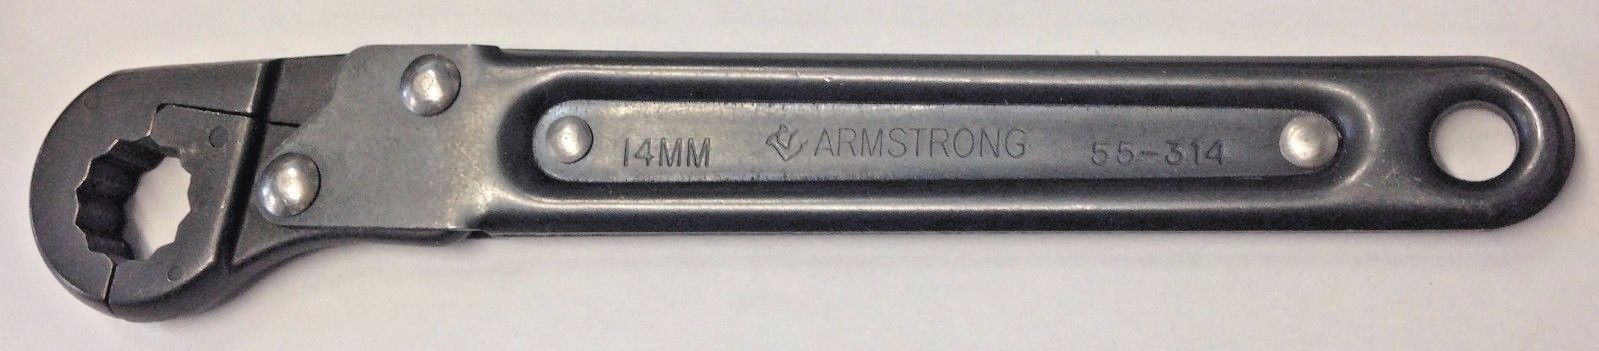 Armstrong 55-314 14mm Ratcheting Flare Nut Wrench USA